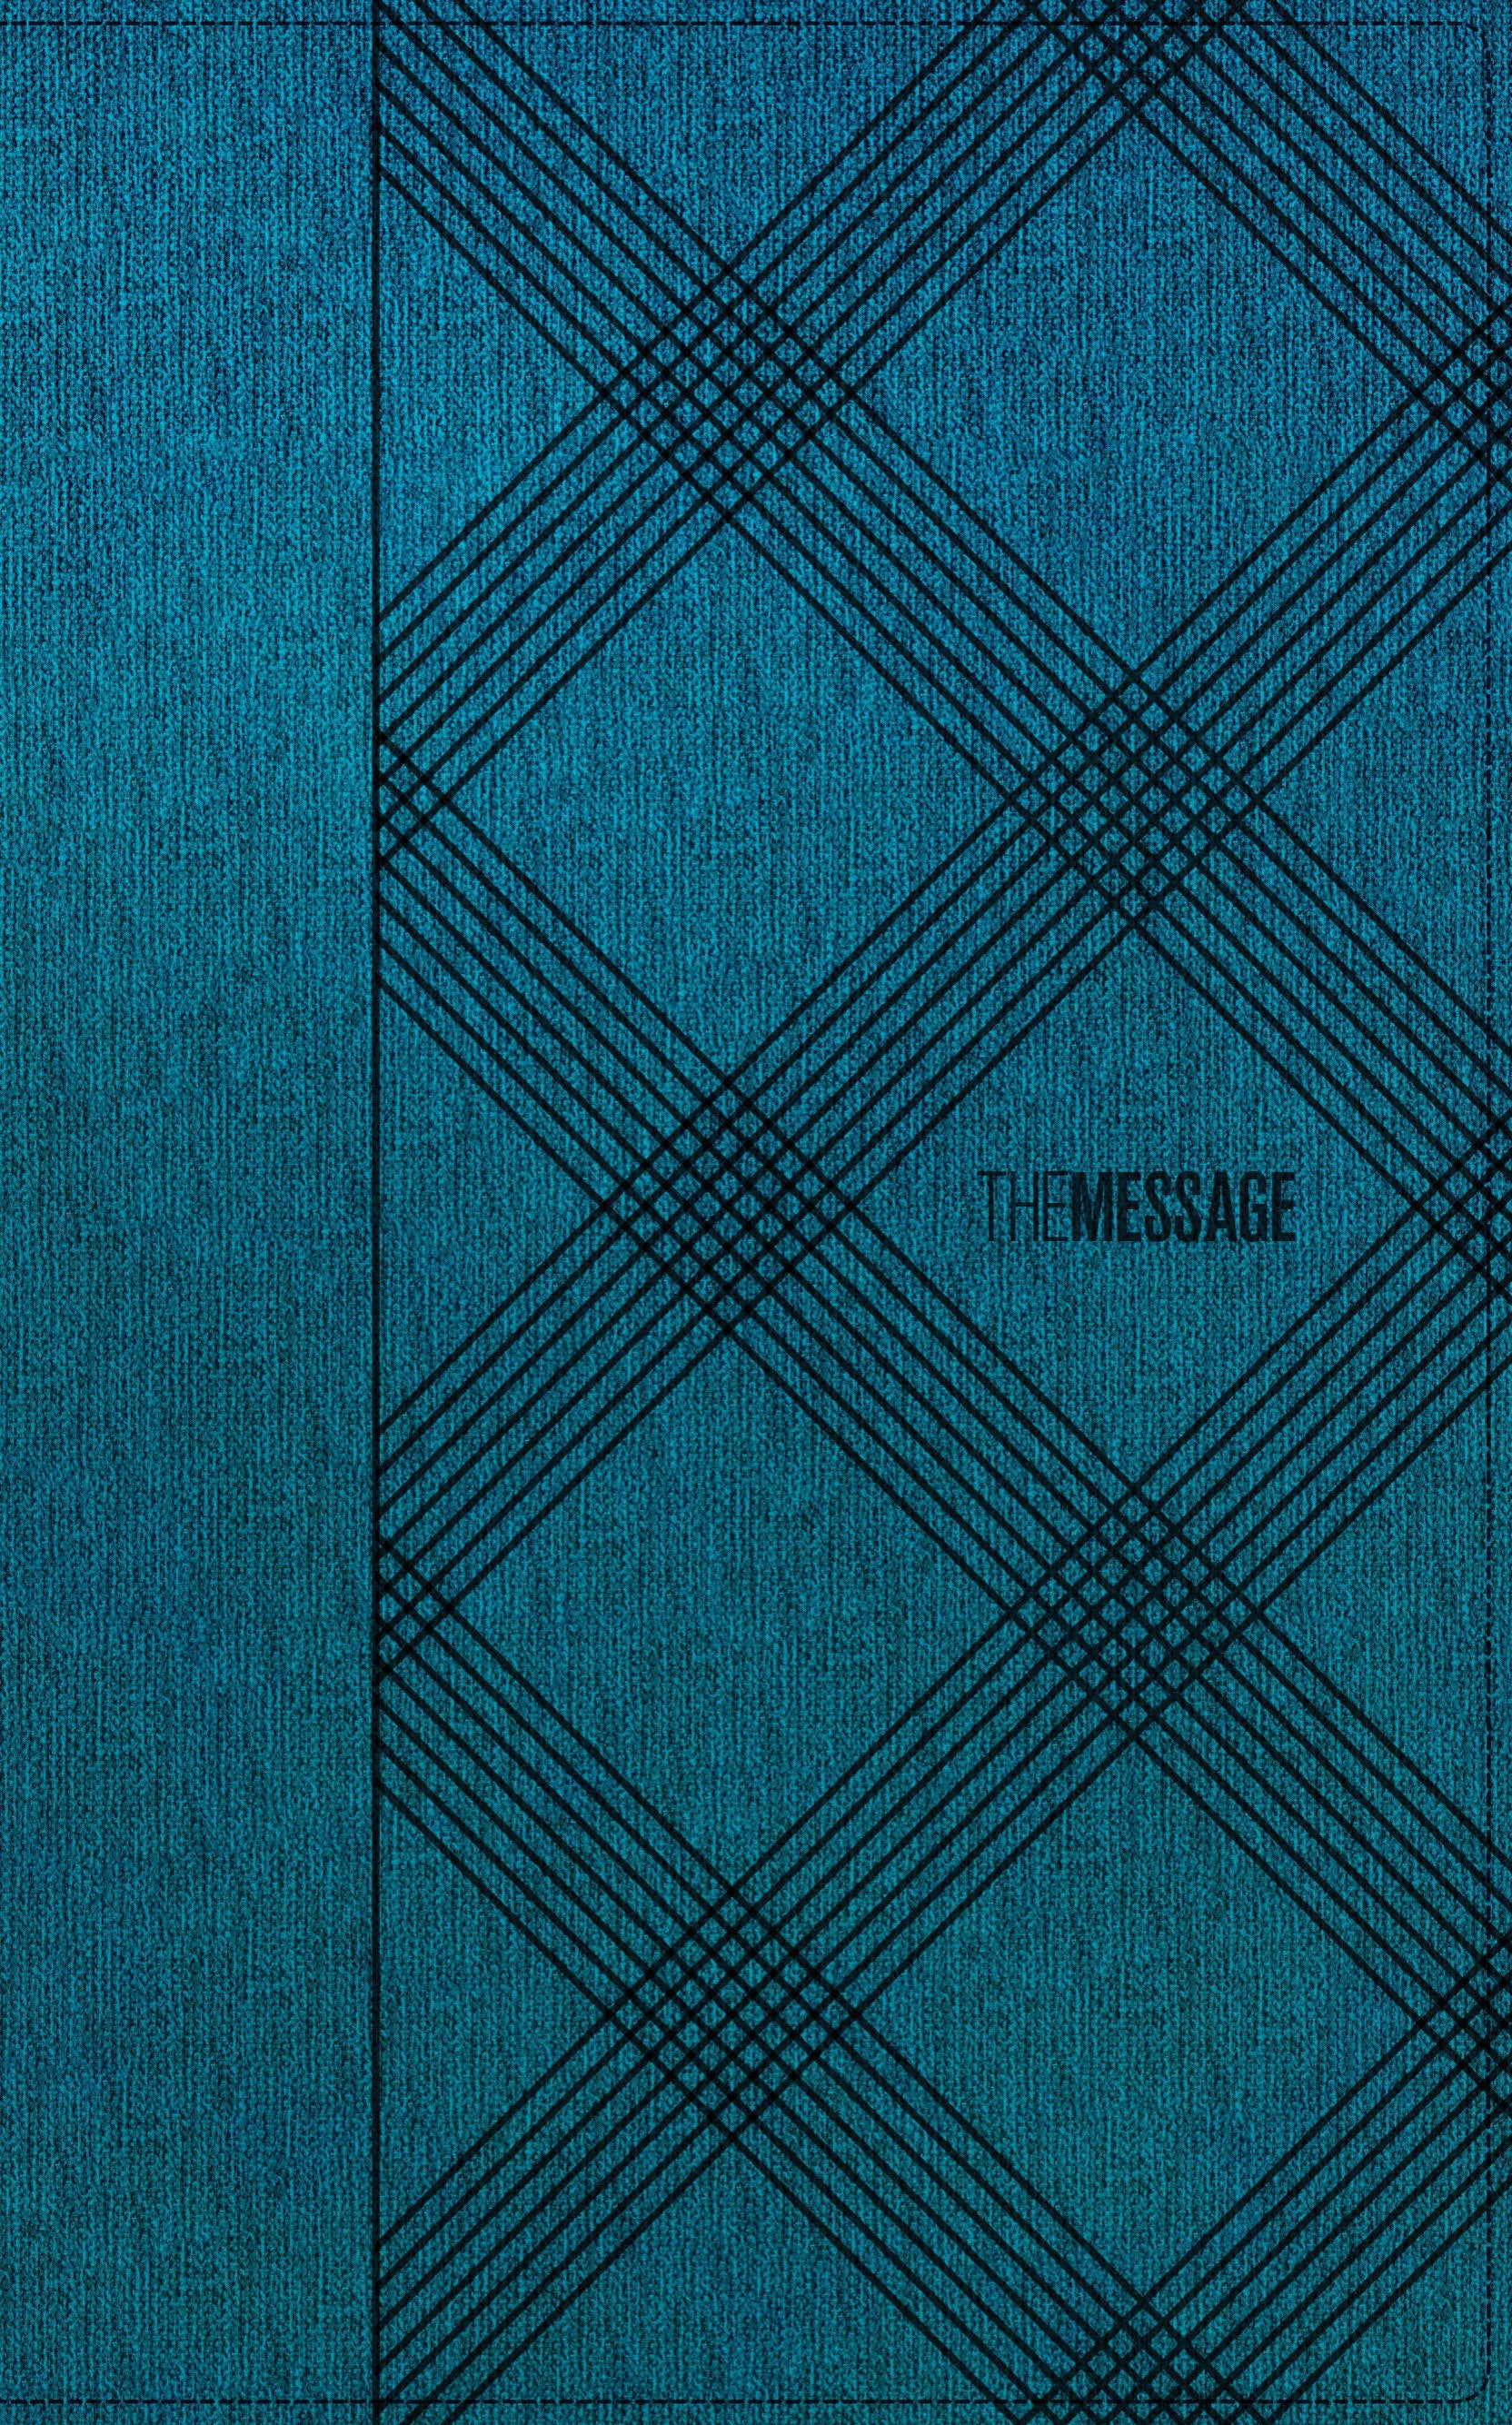 Image of The Message Deluxe Gift Bible, Blue, Imitation Leather, Teal, Crosshatch Denim other